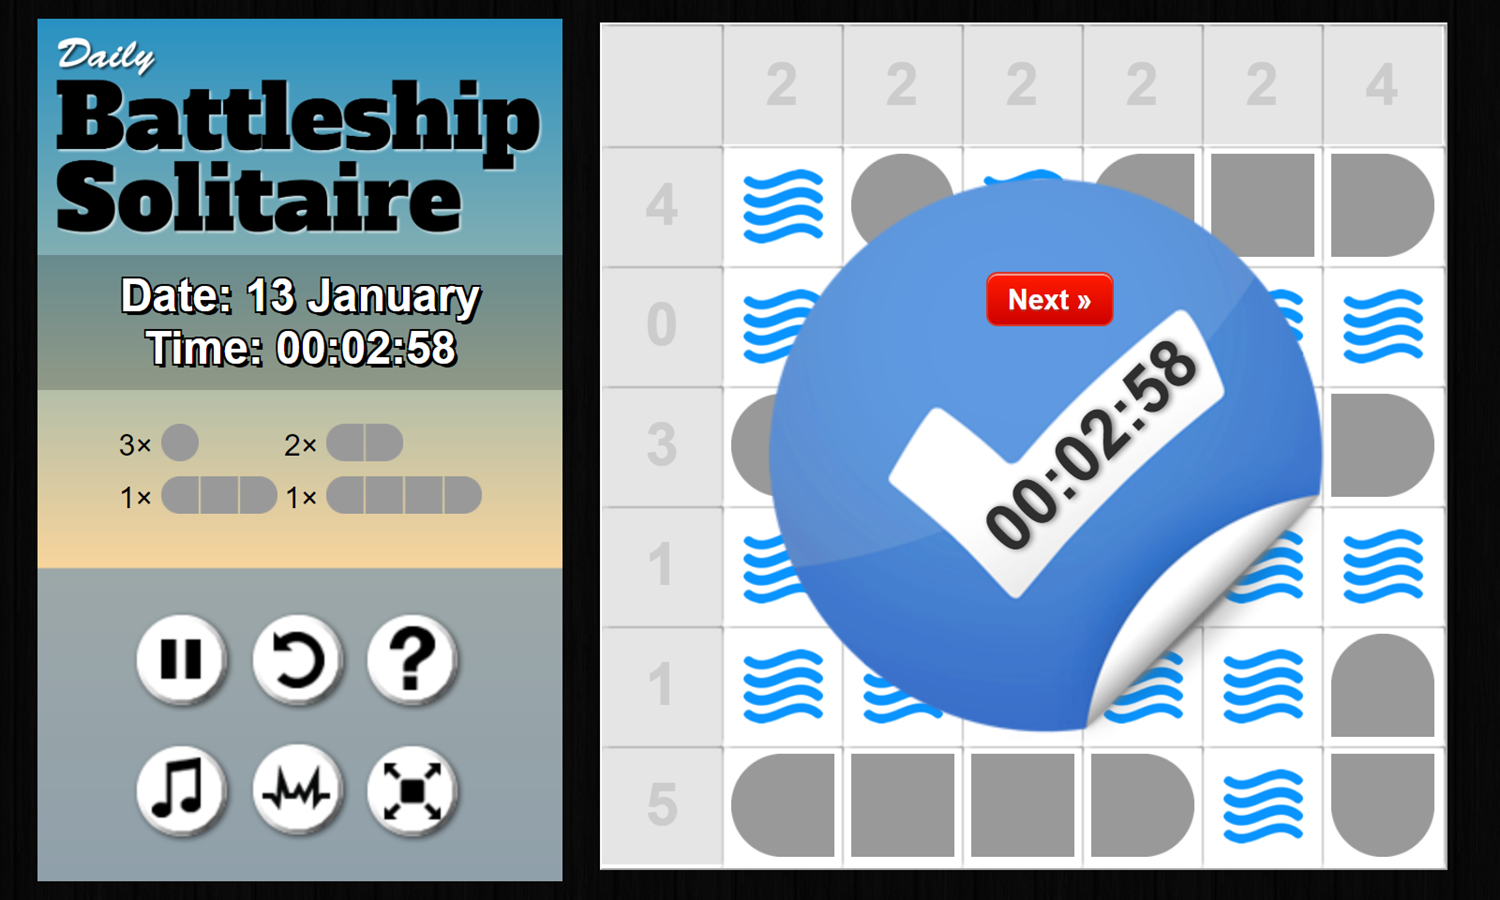 Daily Battleship Solitaire Game Complete Screenshot.